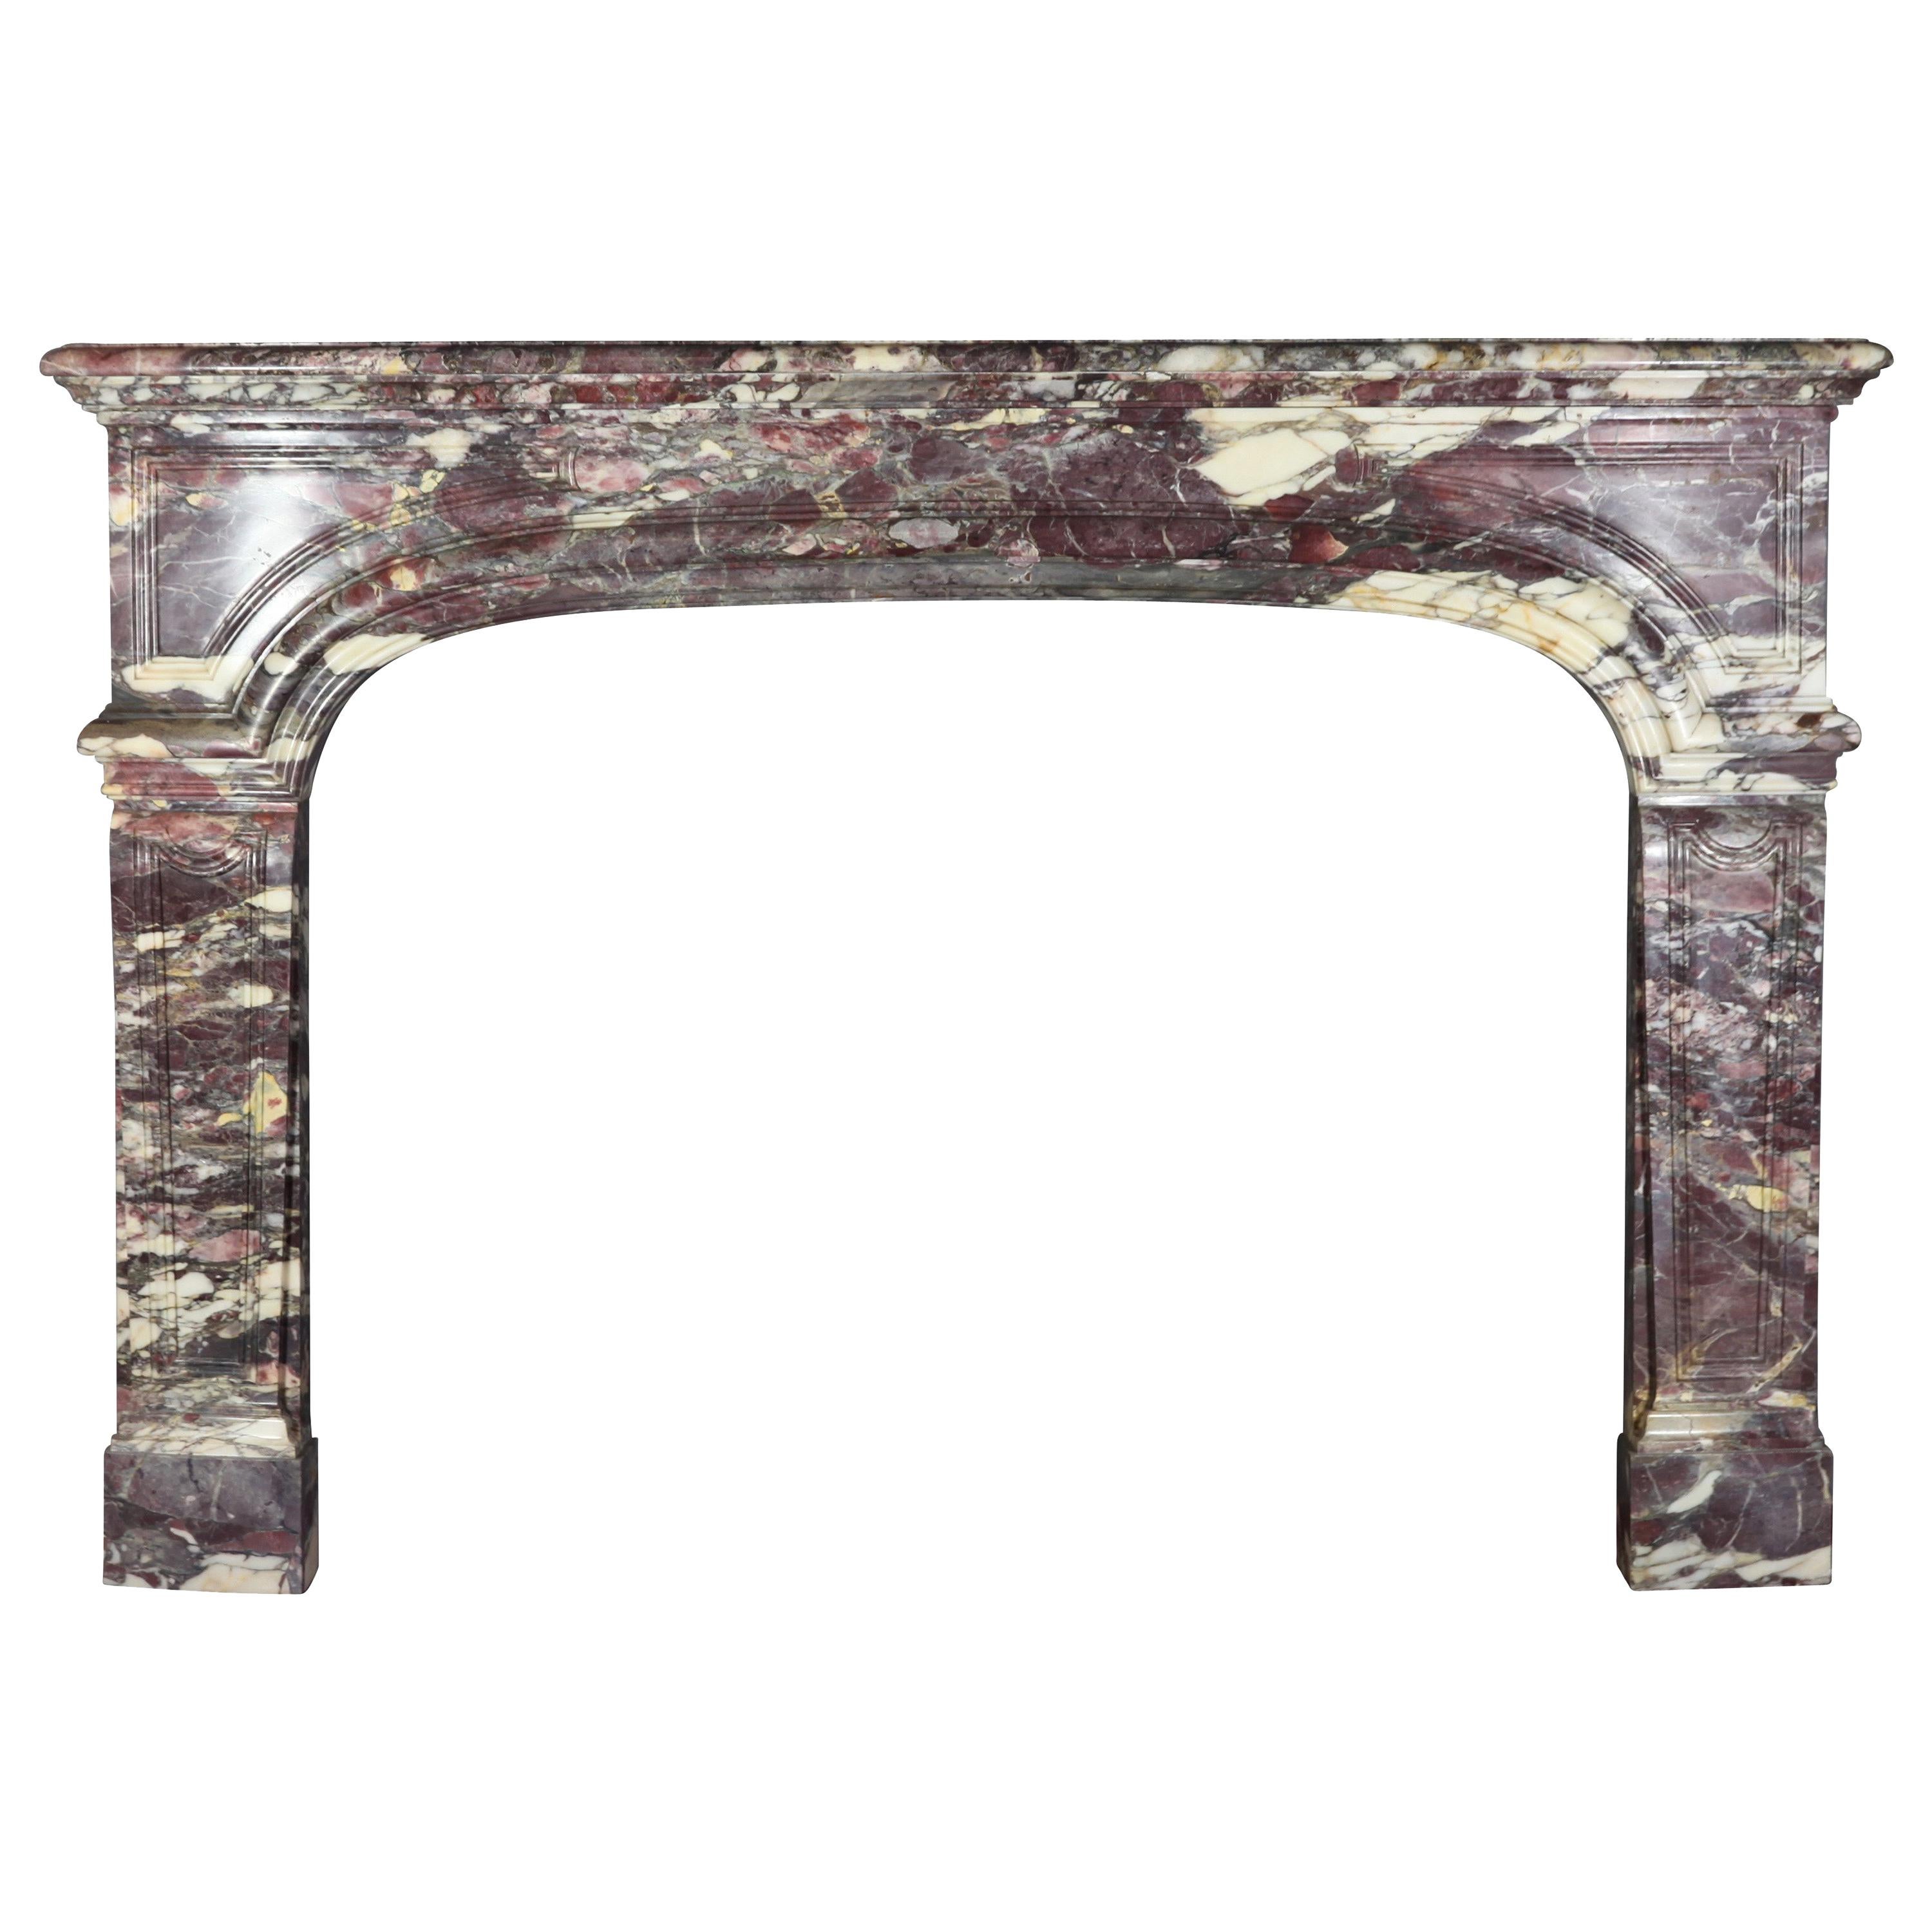 Chique French Royal Brêche Violet Marble Antique Fireplace Surround